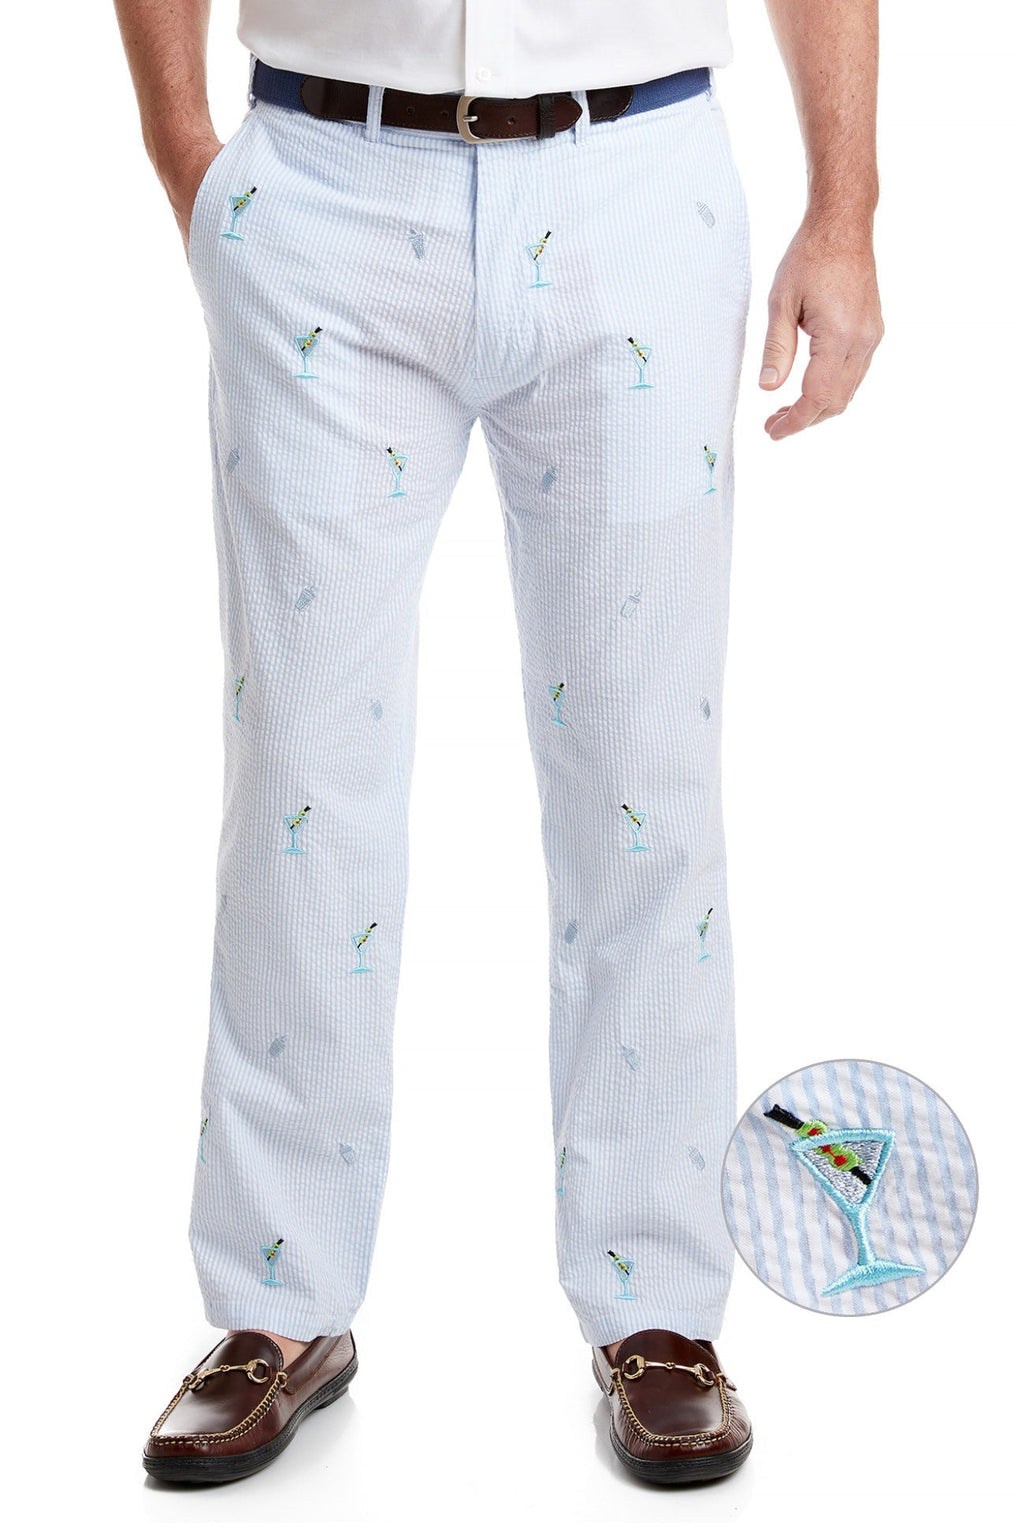 Harbor Pant Blue Seersucker with Martini and Shaker MENS EMBROIDERED PANTS Castaway Nantucket Island